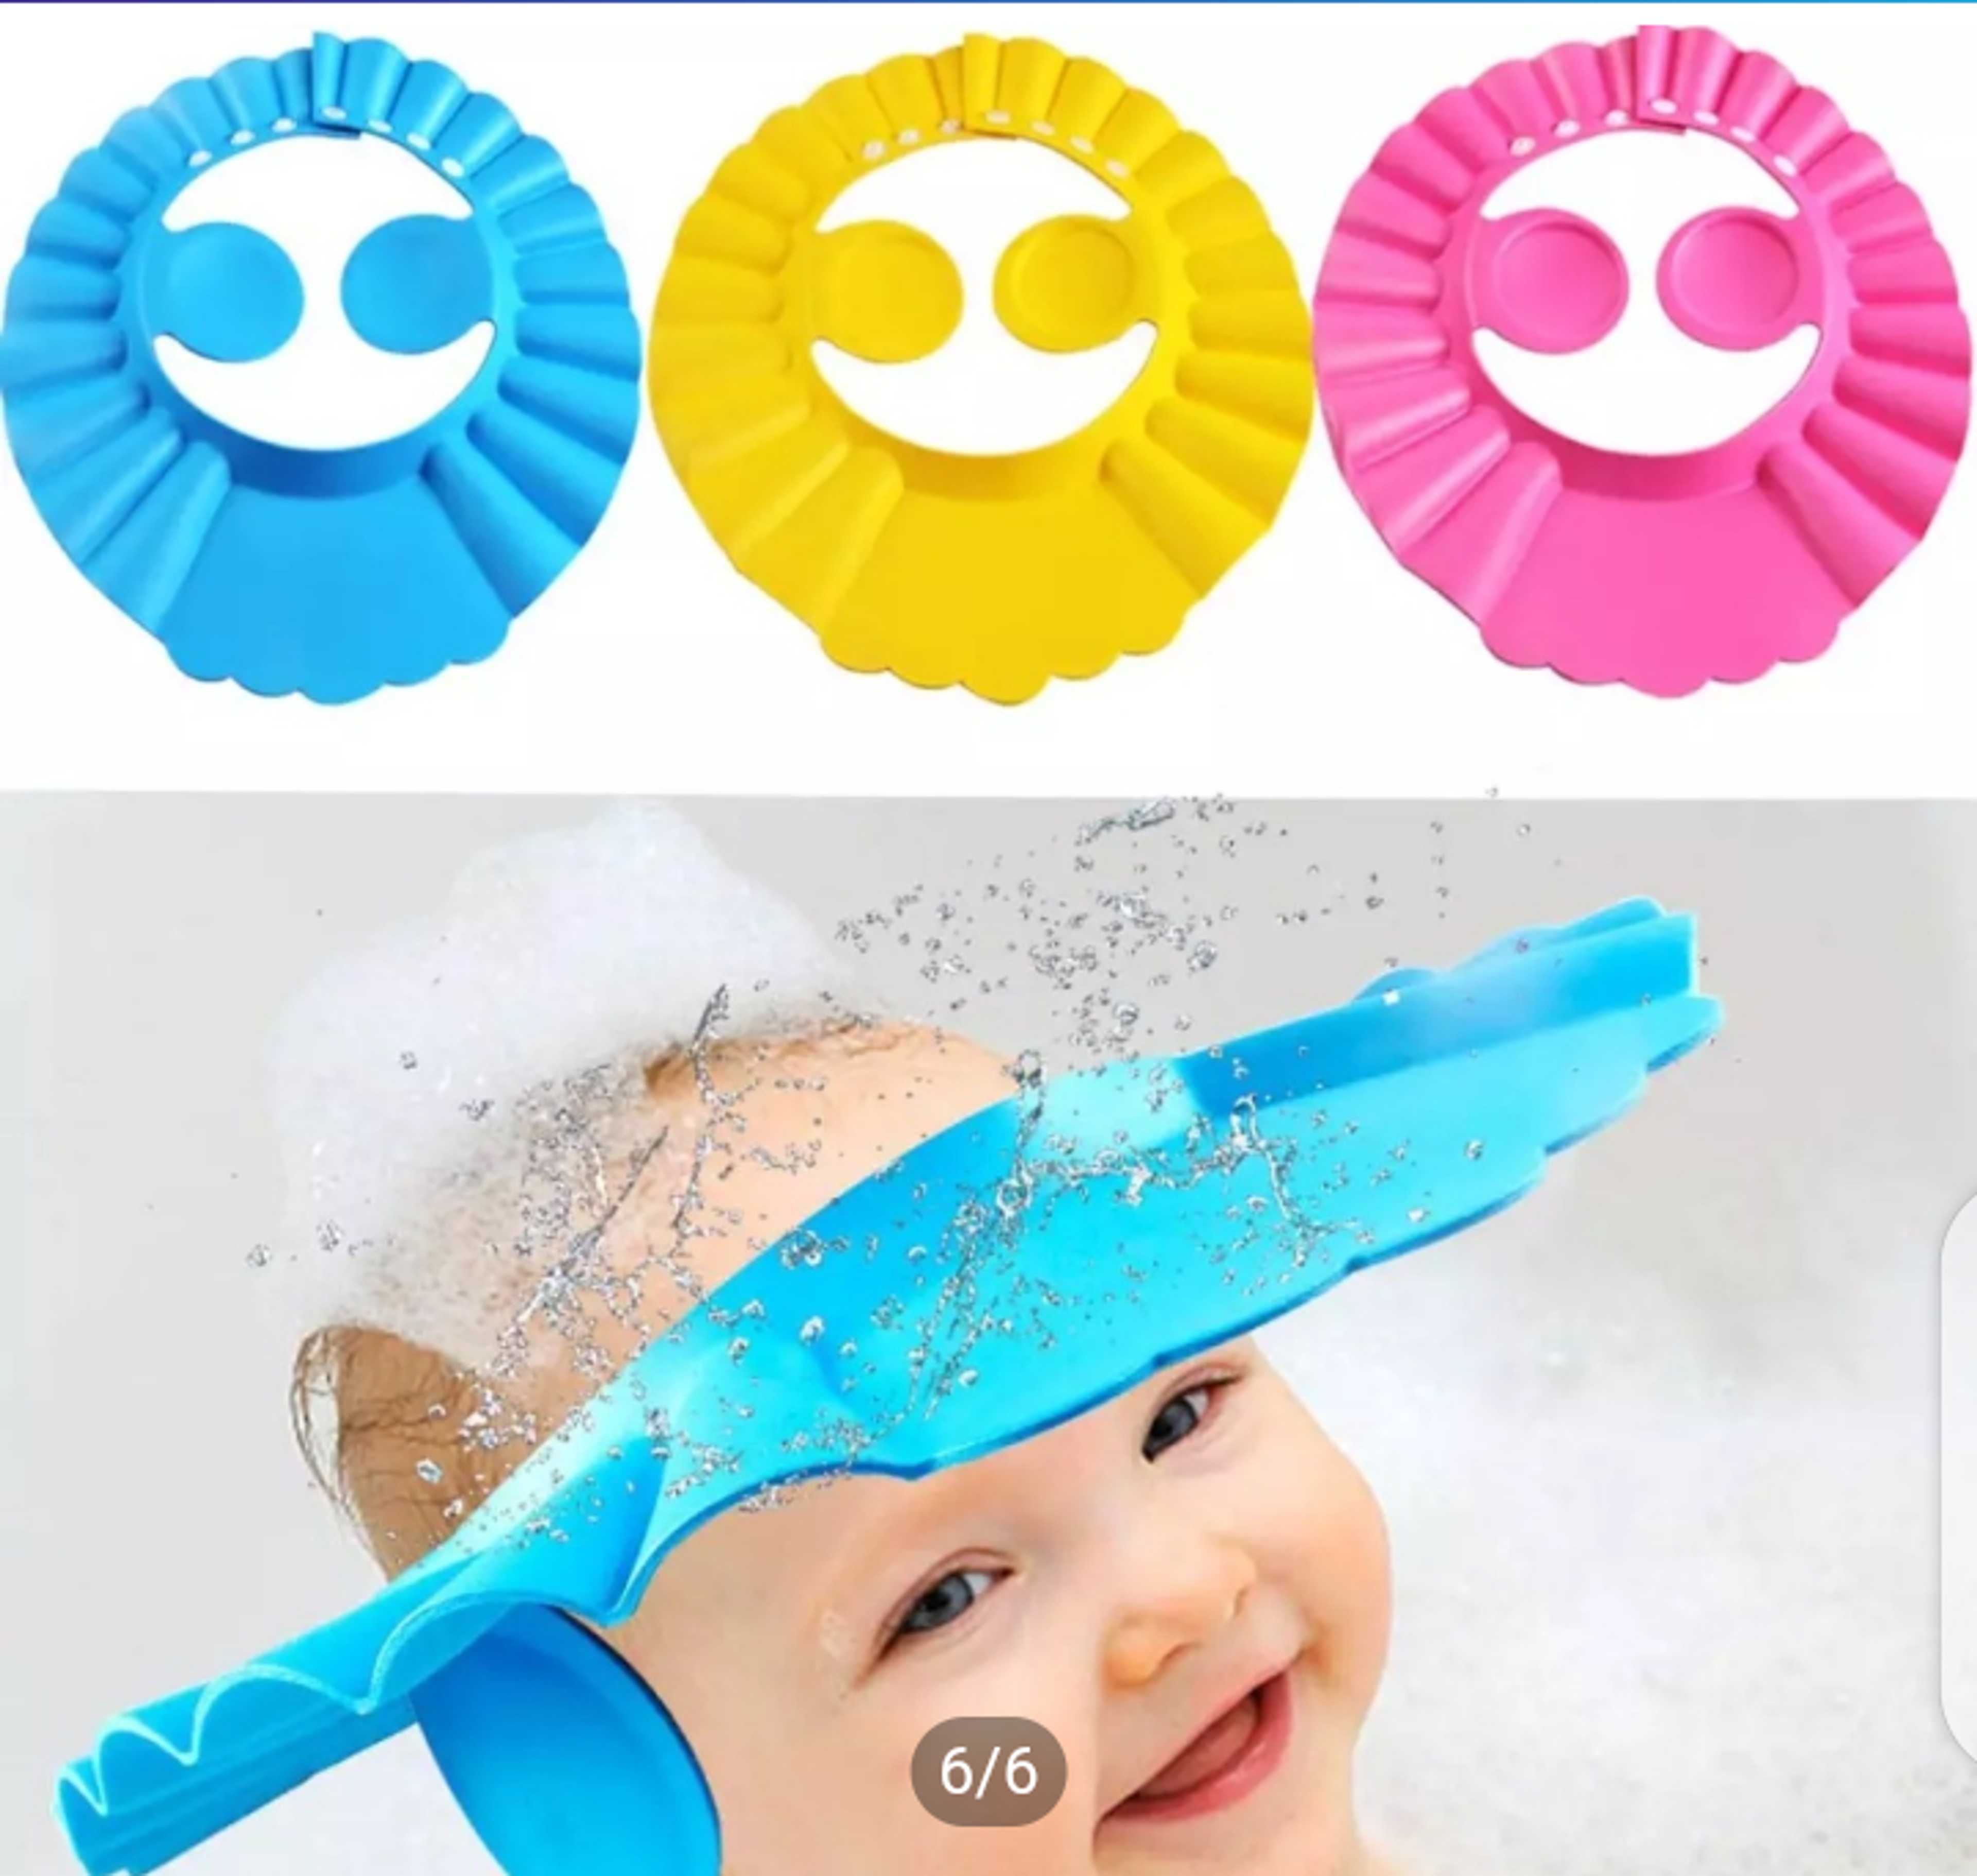 New Cute Adjustable Baby Shampoo Bath Shower Cap With Ear Protection Waterproof toddler Sun Protection Hat for Washing Hair